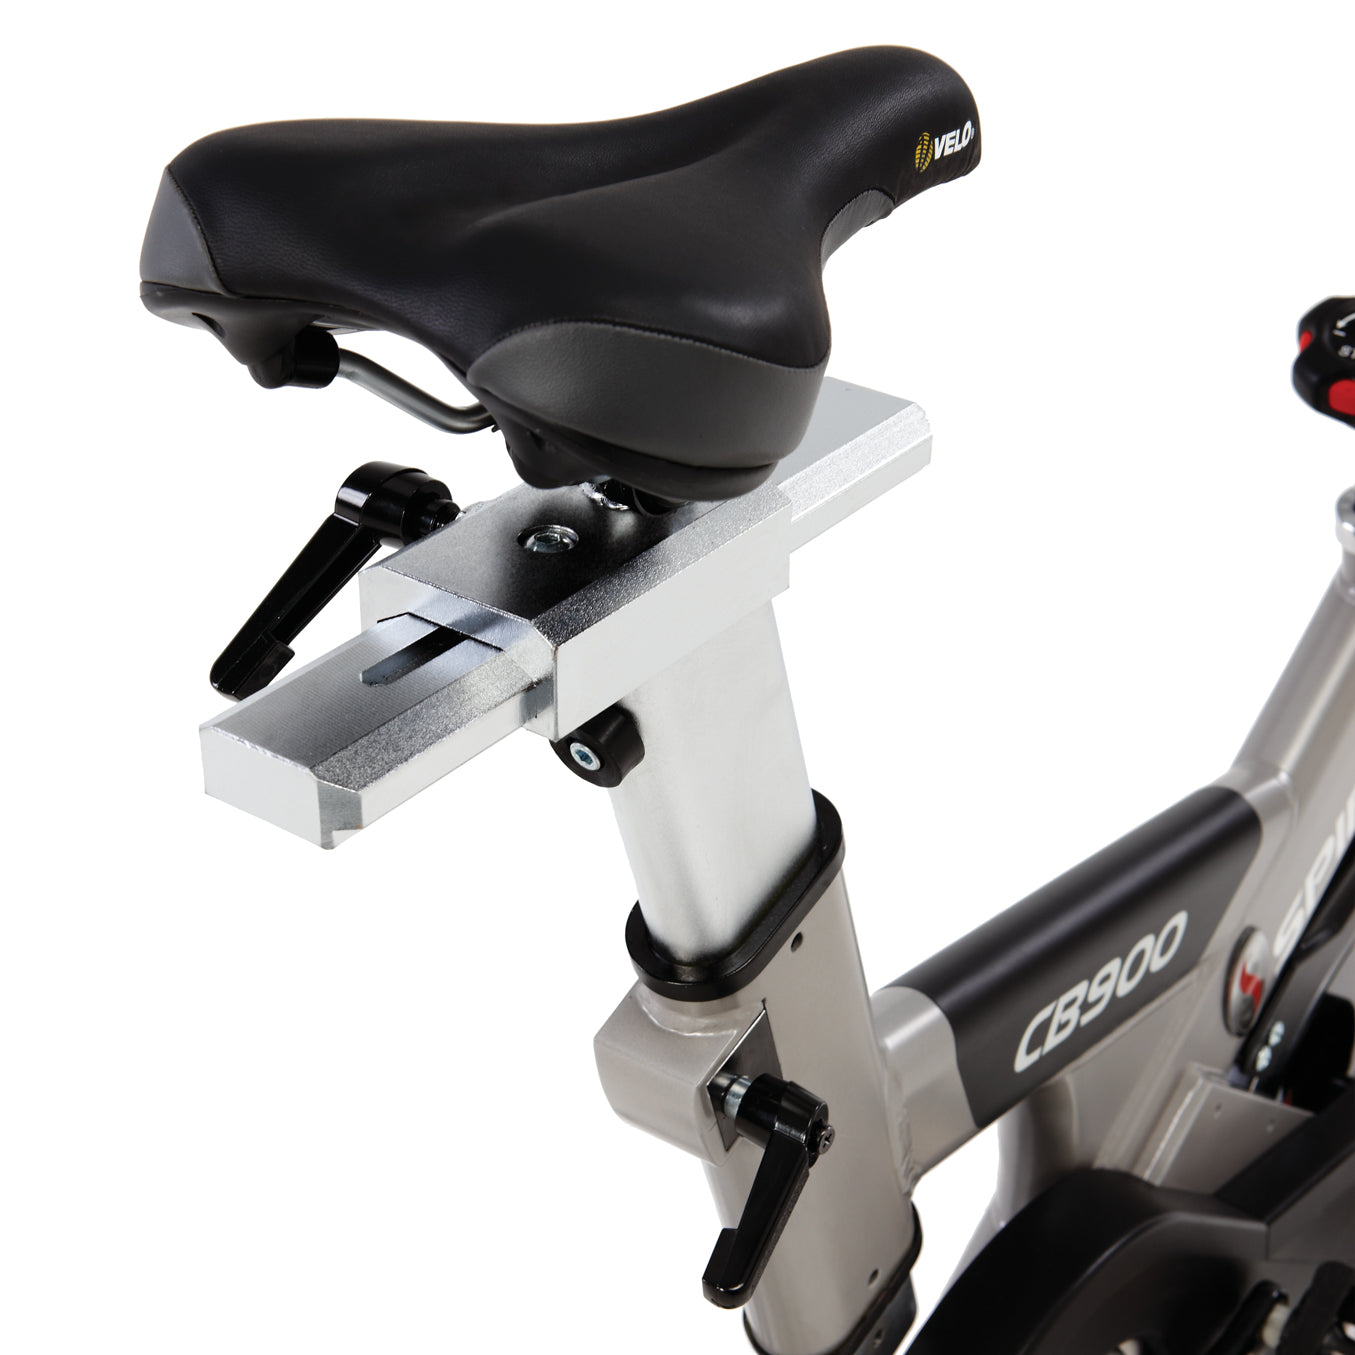 Spirit CB900 Spinning Cycle - Part of the Perform Better UK Range